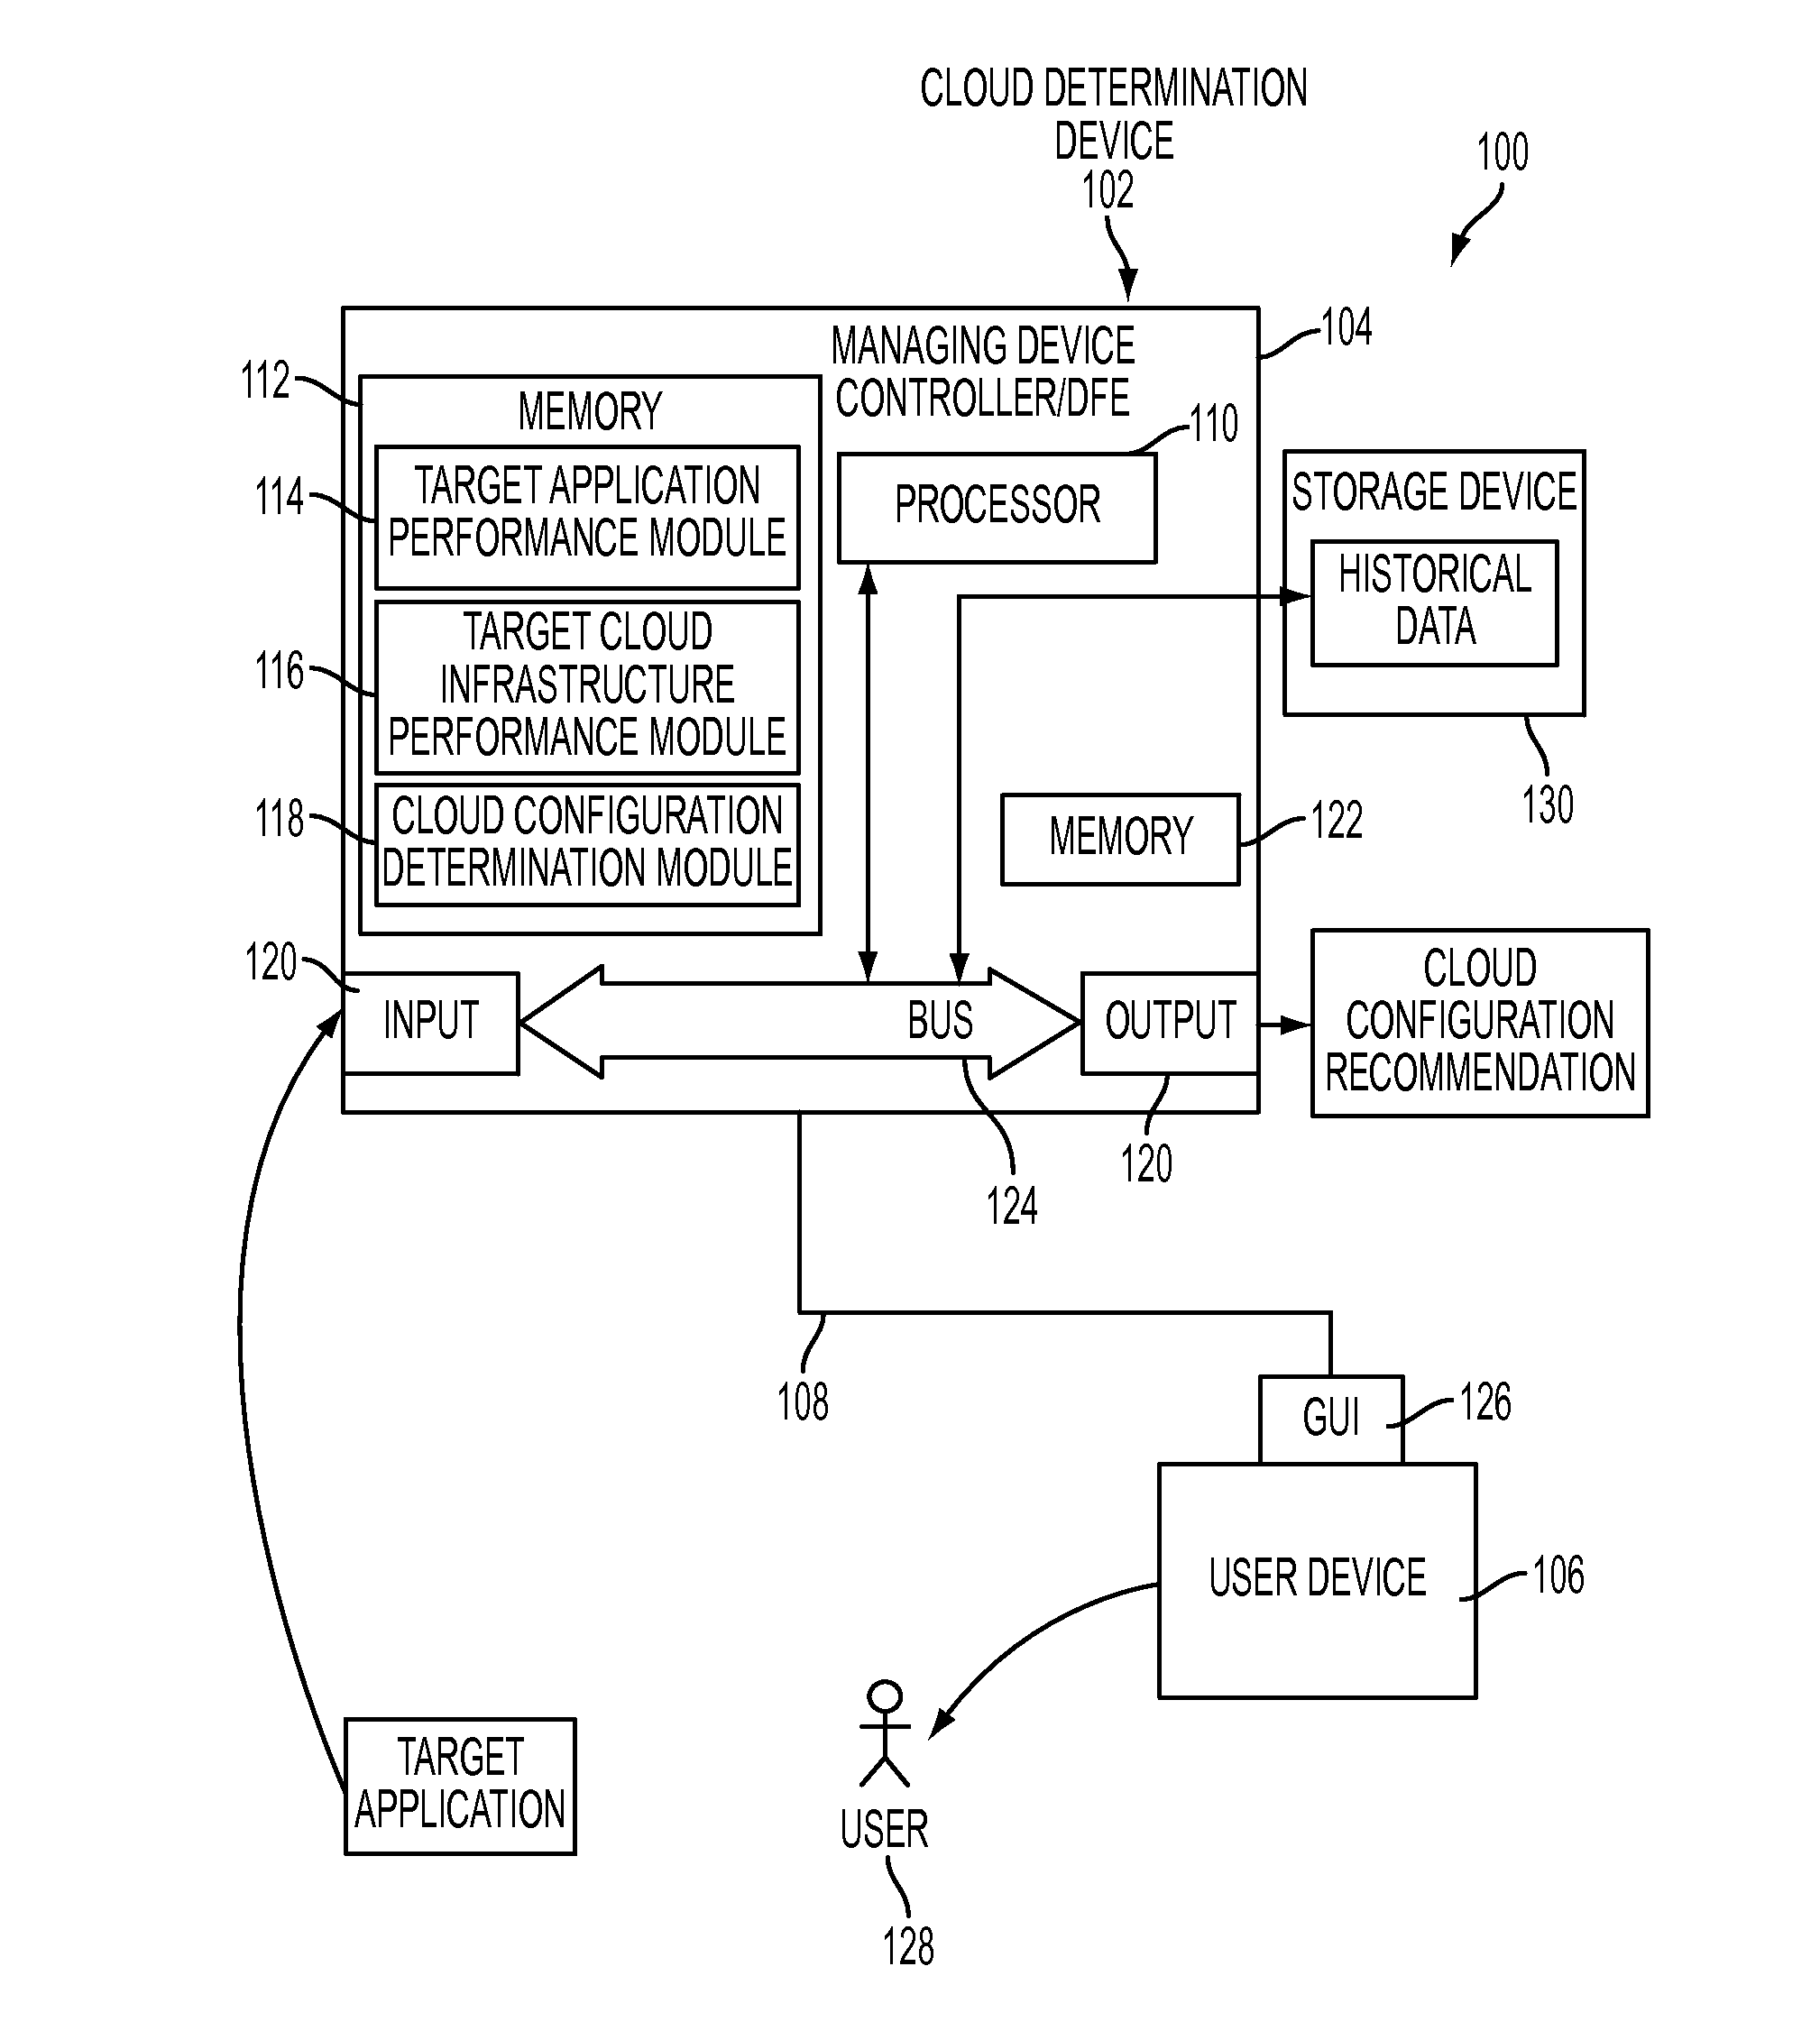 System and method for identifying optimal cloud configuration in black-box environments to achieve target throughput with best price based on performance capability benchmarking